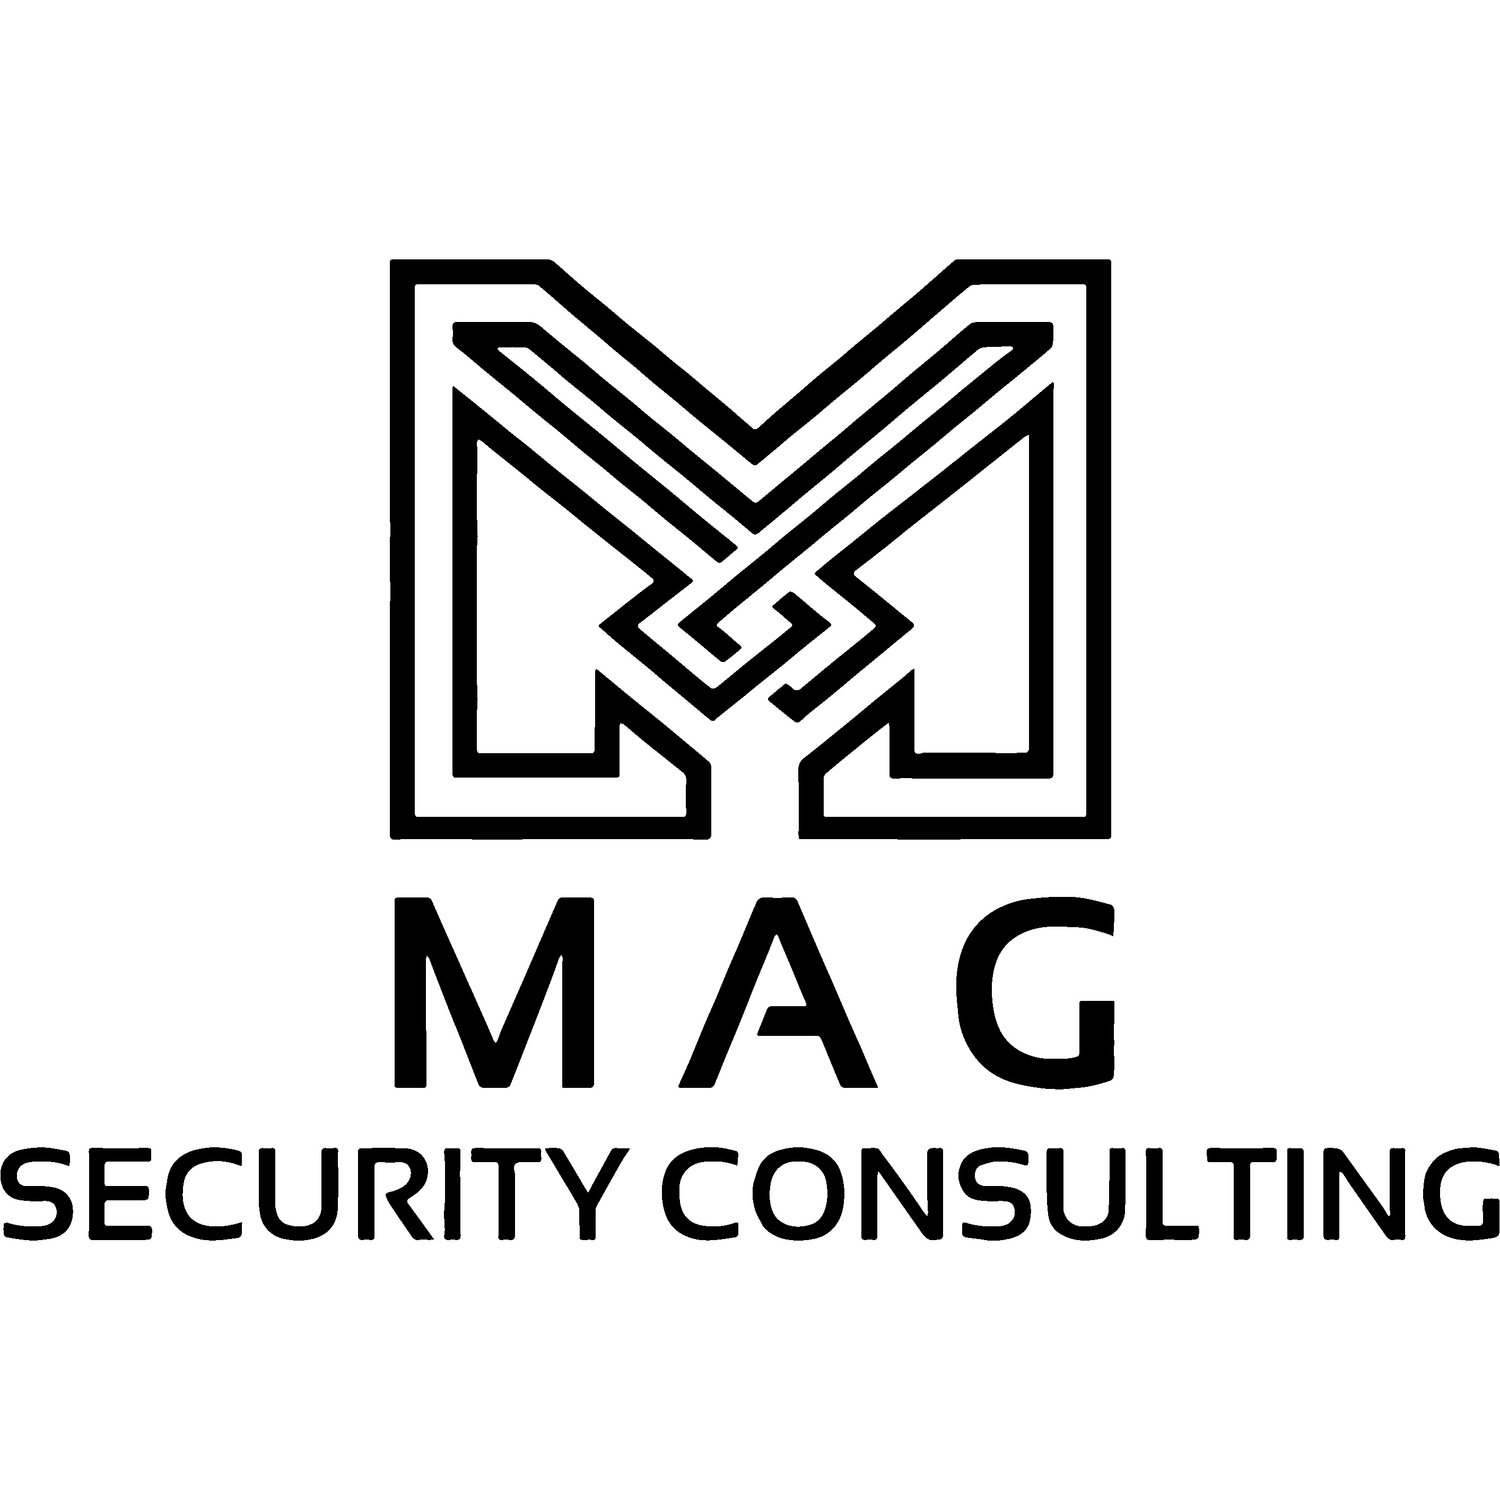 MAG Security Consulting, Inc.